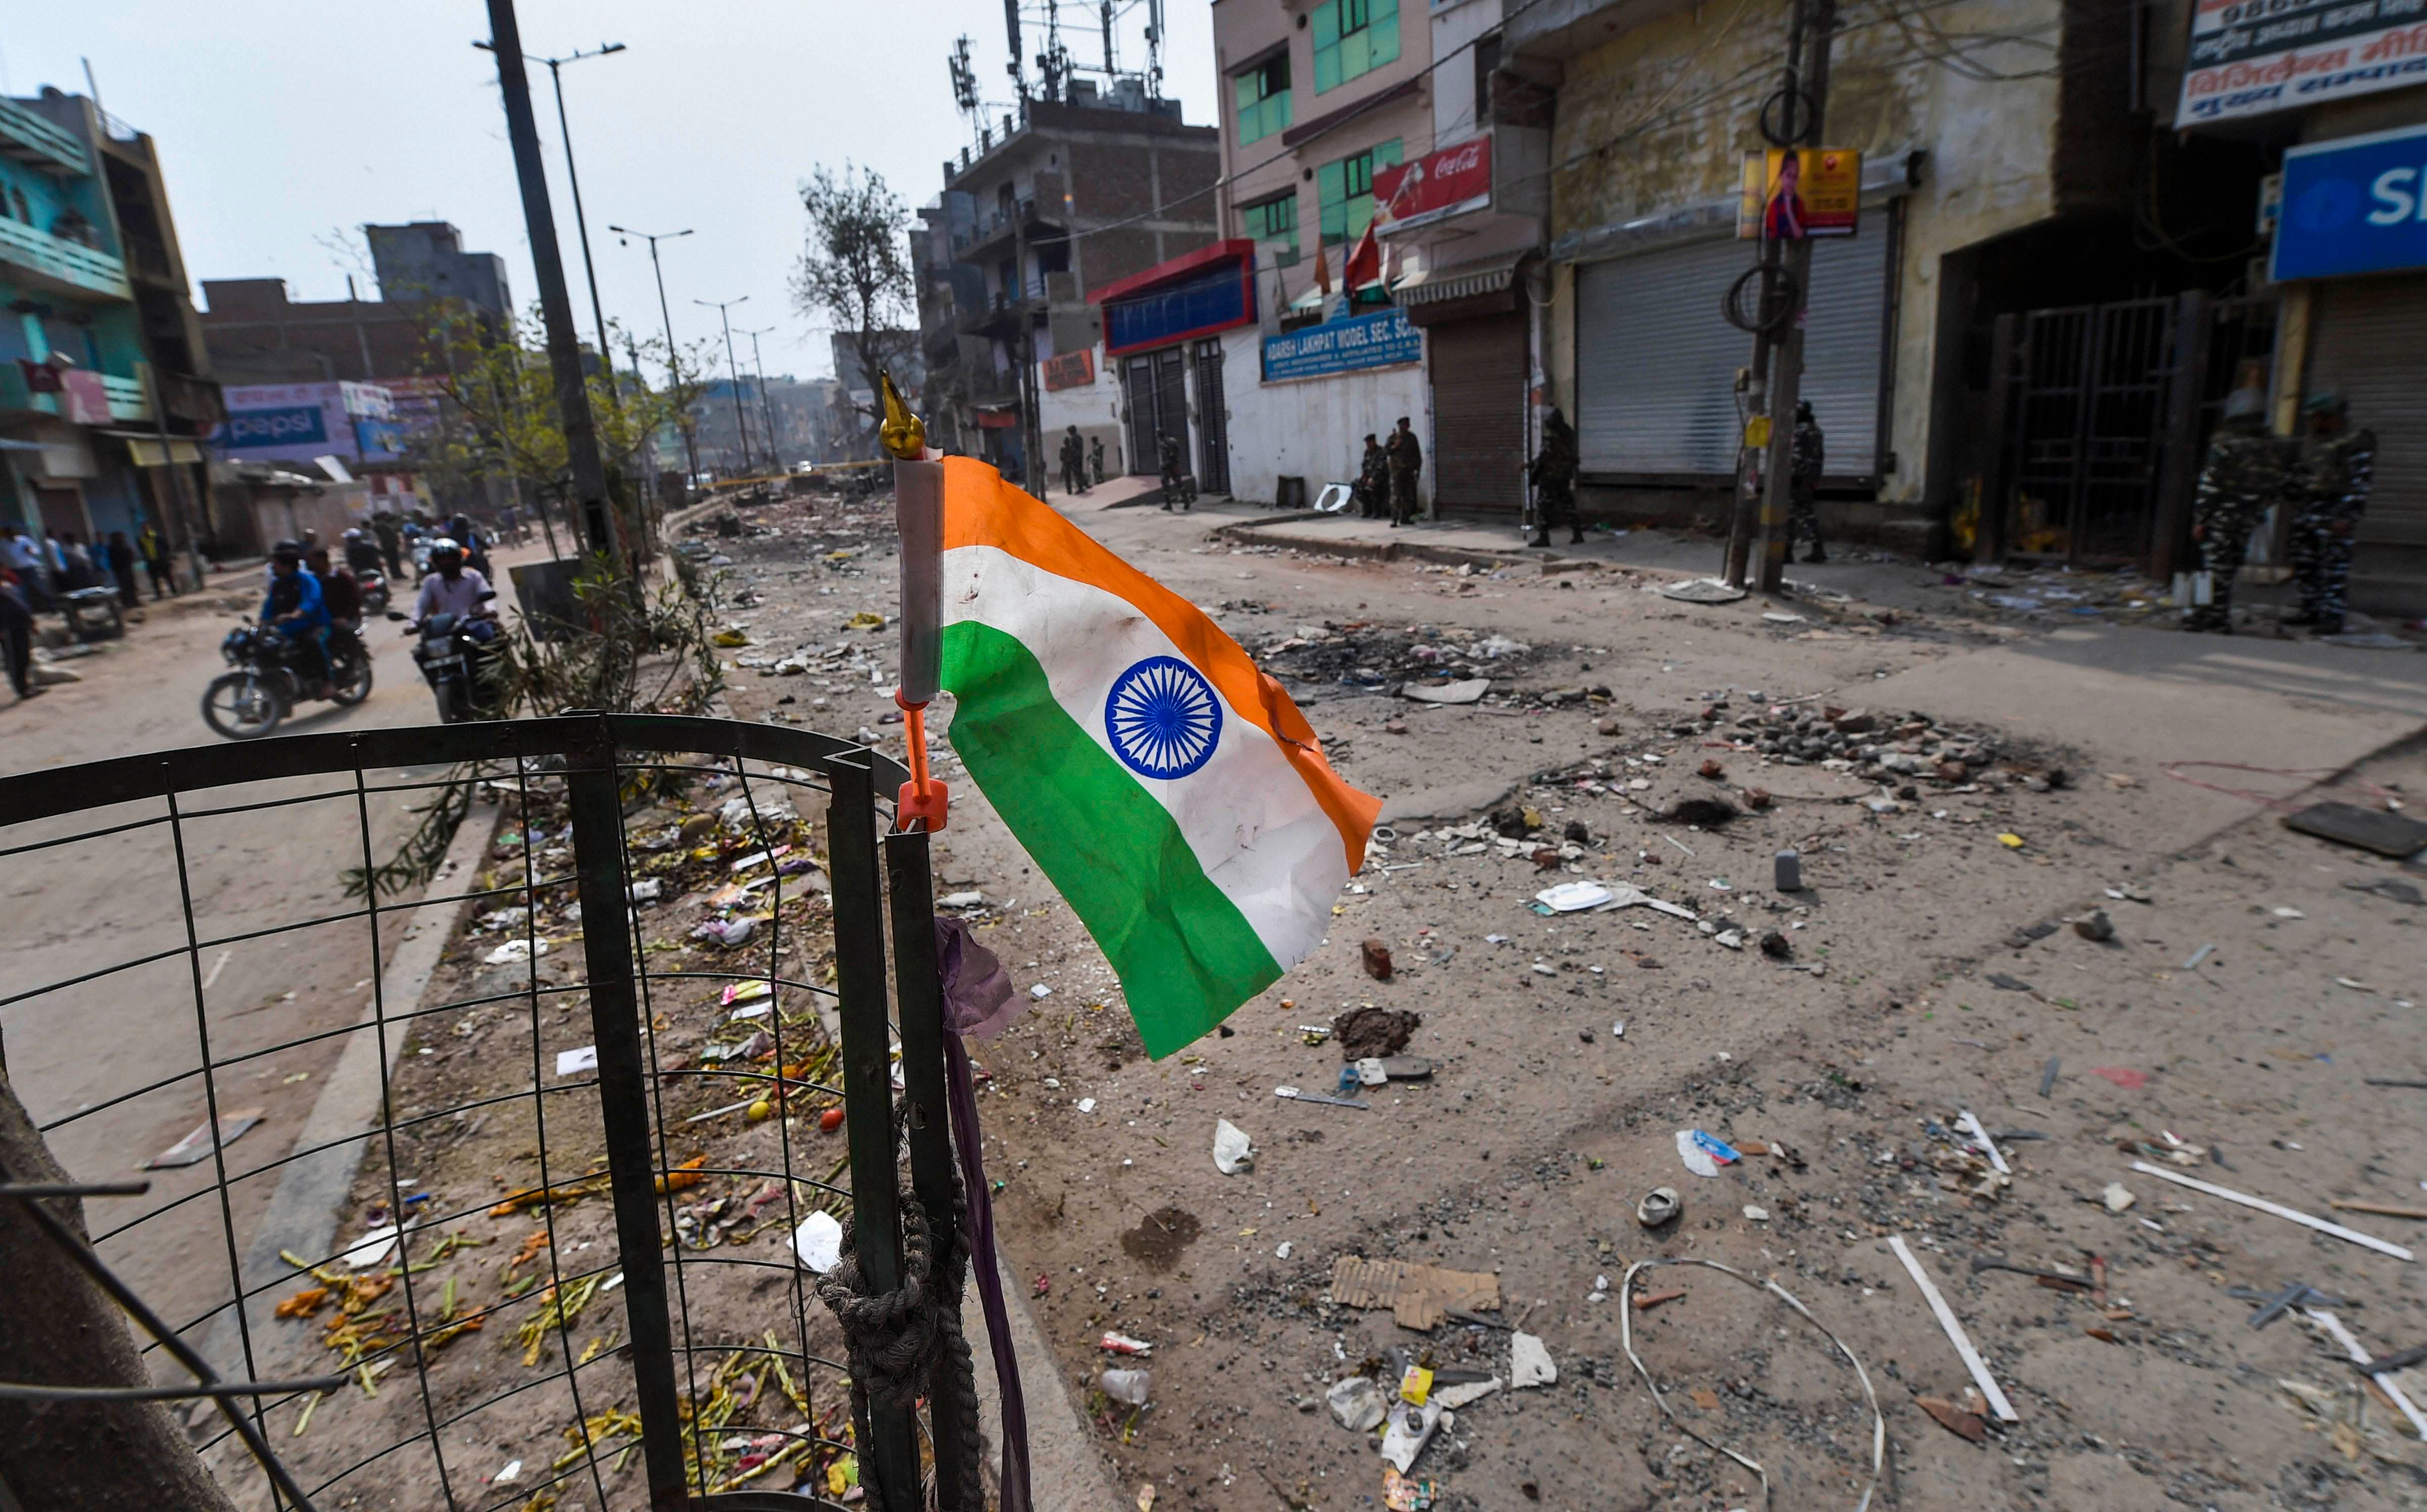 Security personnel stand guard at a closed market in a riot-affected area of northeast Delhi. (Credit: PTI)